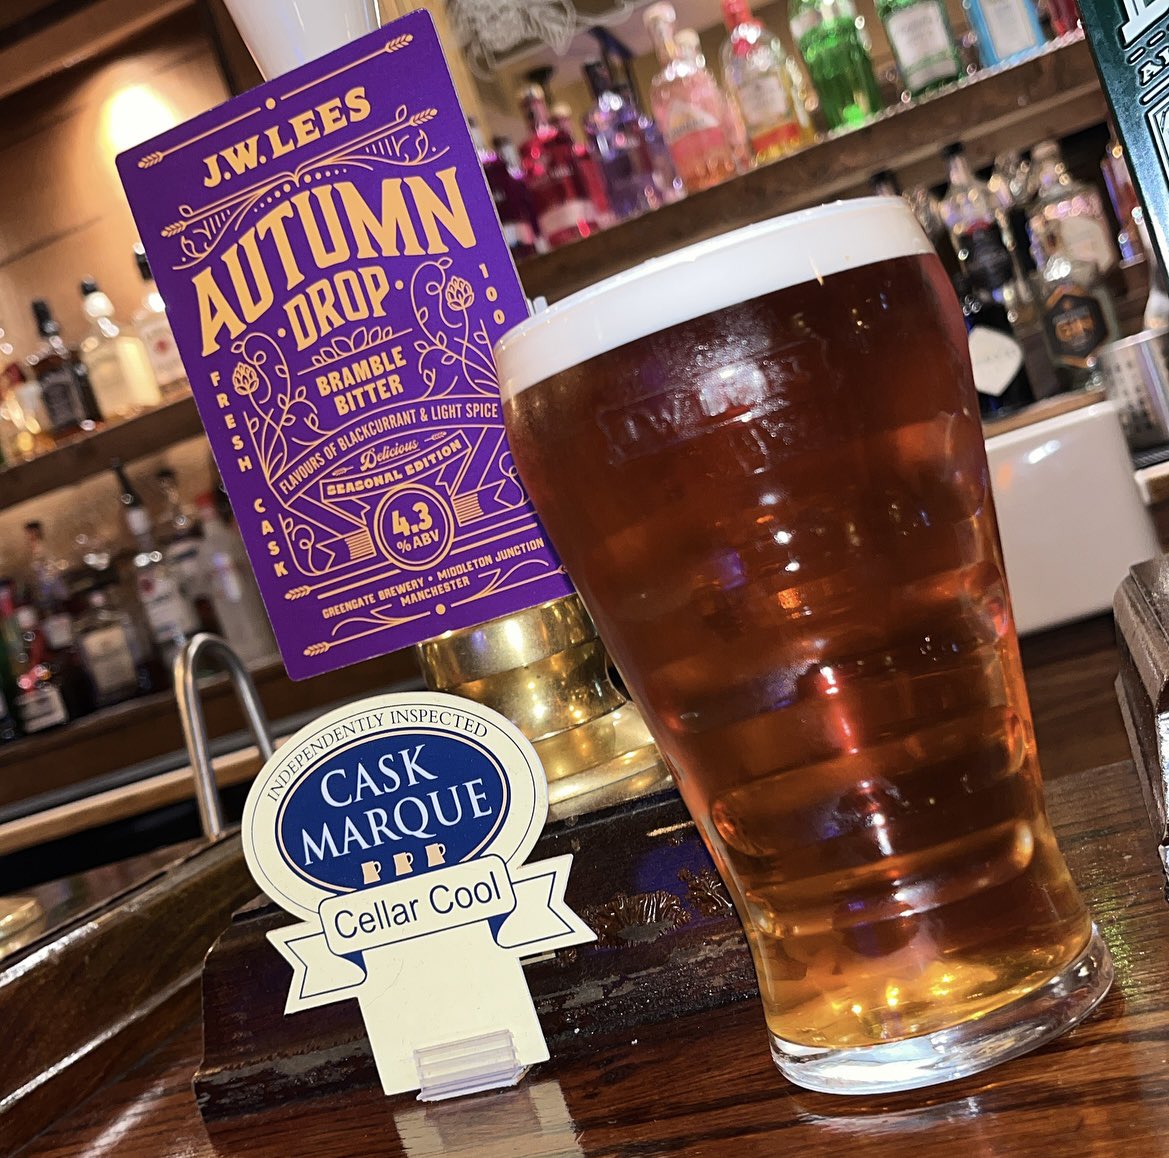 Have you tried our Autumn Drop cask ale yet?

Our Autumn Drop brew is perfect for those cosy evenings. 

#realalepub #manchester #jwleesbrewery #drink